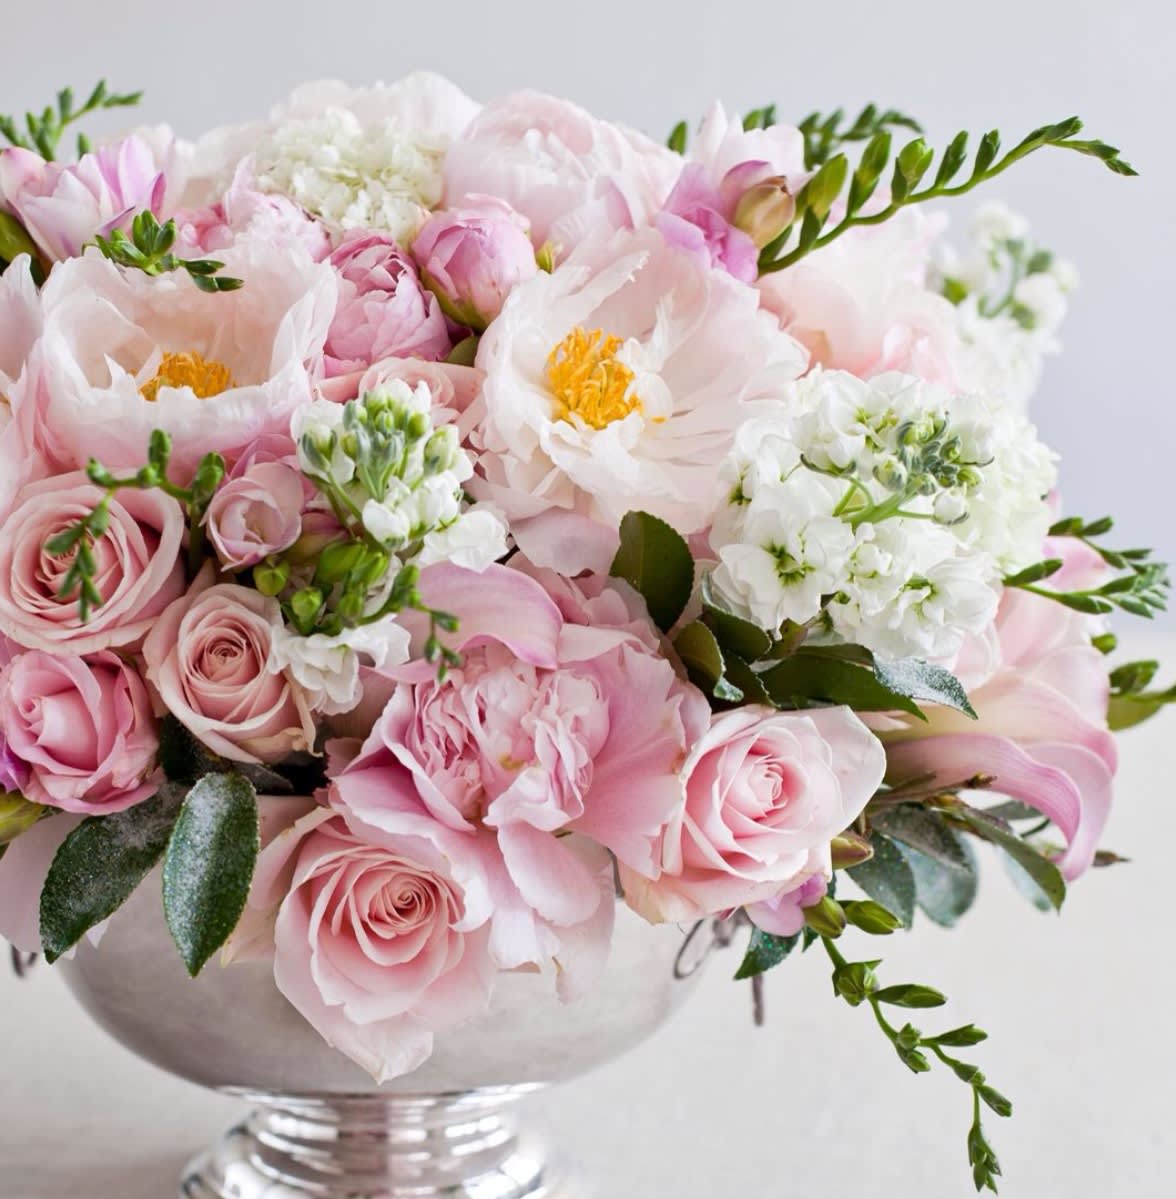 Selin - Blush color combination for all happy occasions. Adorable seasonal flowers tucked in nice silver vase. Ideal for your mom for Mother's Day, or loved one for Valentine's Day, or your boss on Boss's Day. This arrangement will make anyone's day happy and memorable.